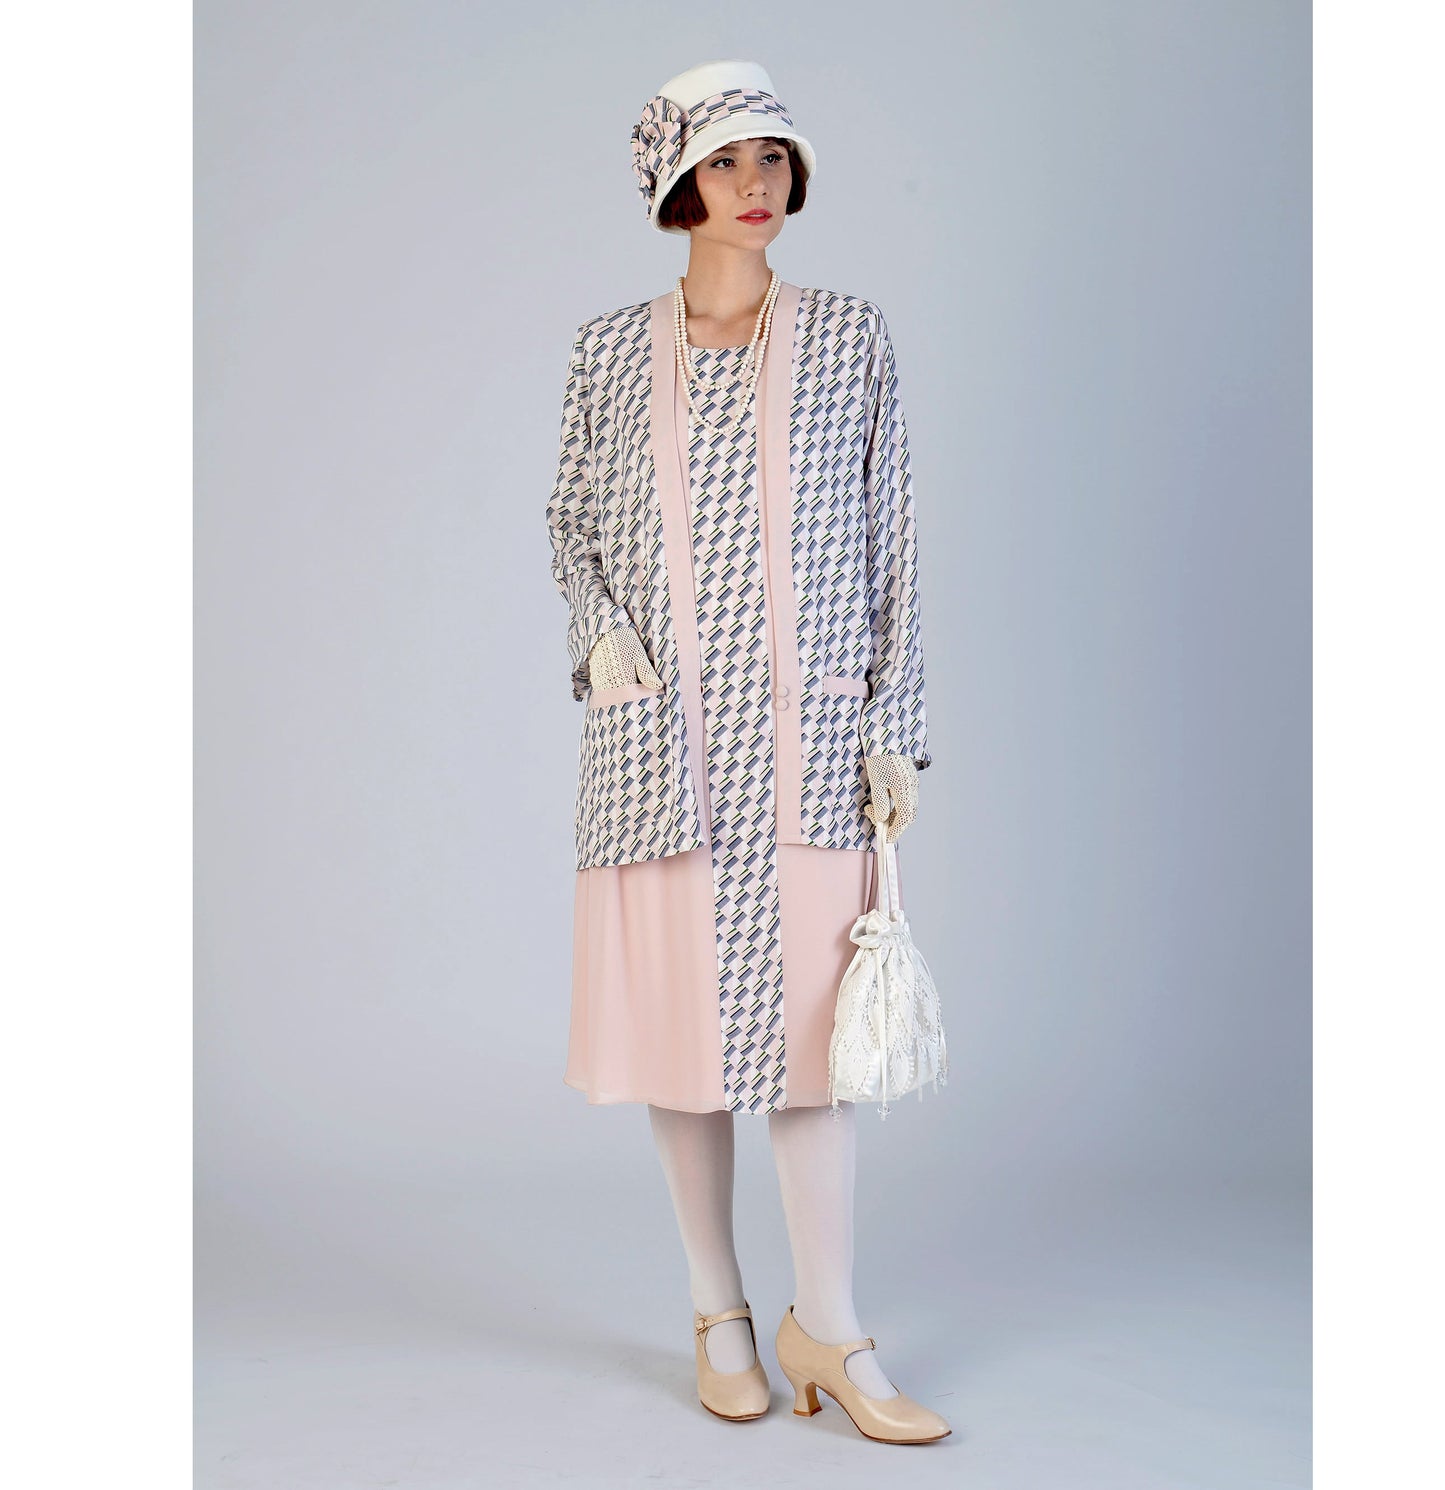 1920s cloche hat in off-white cotton and rectangular printed chiffon